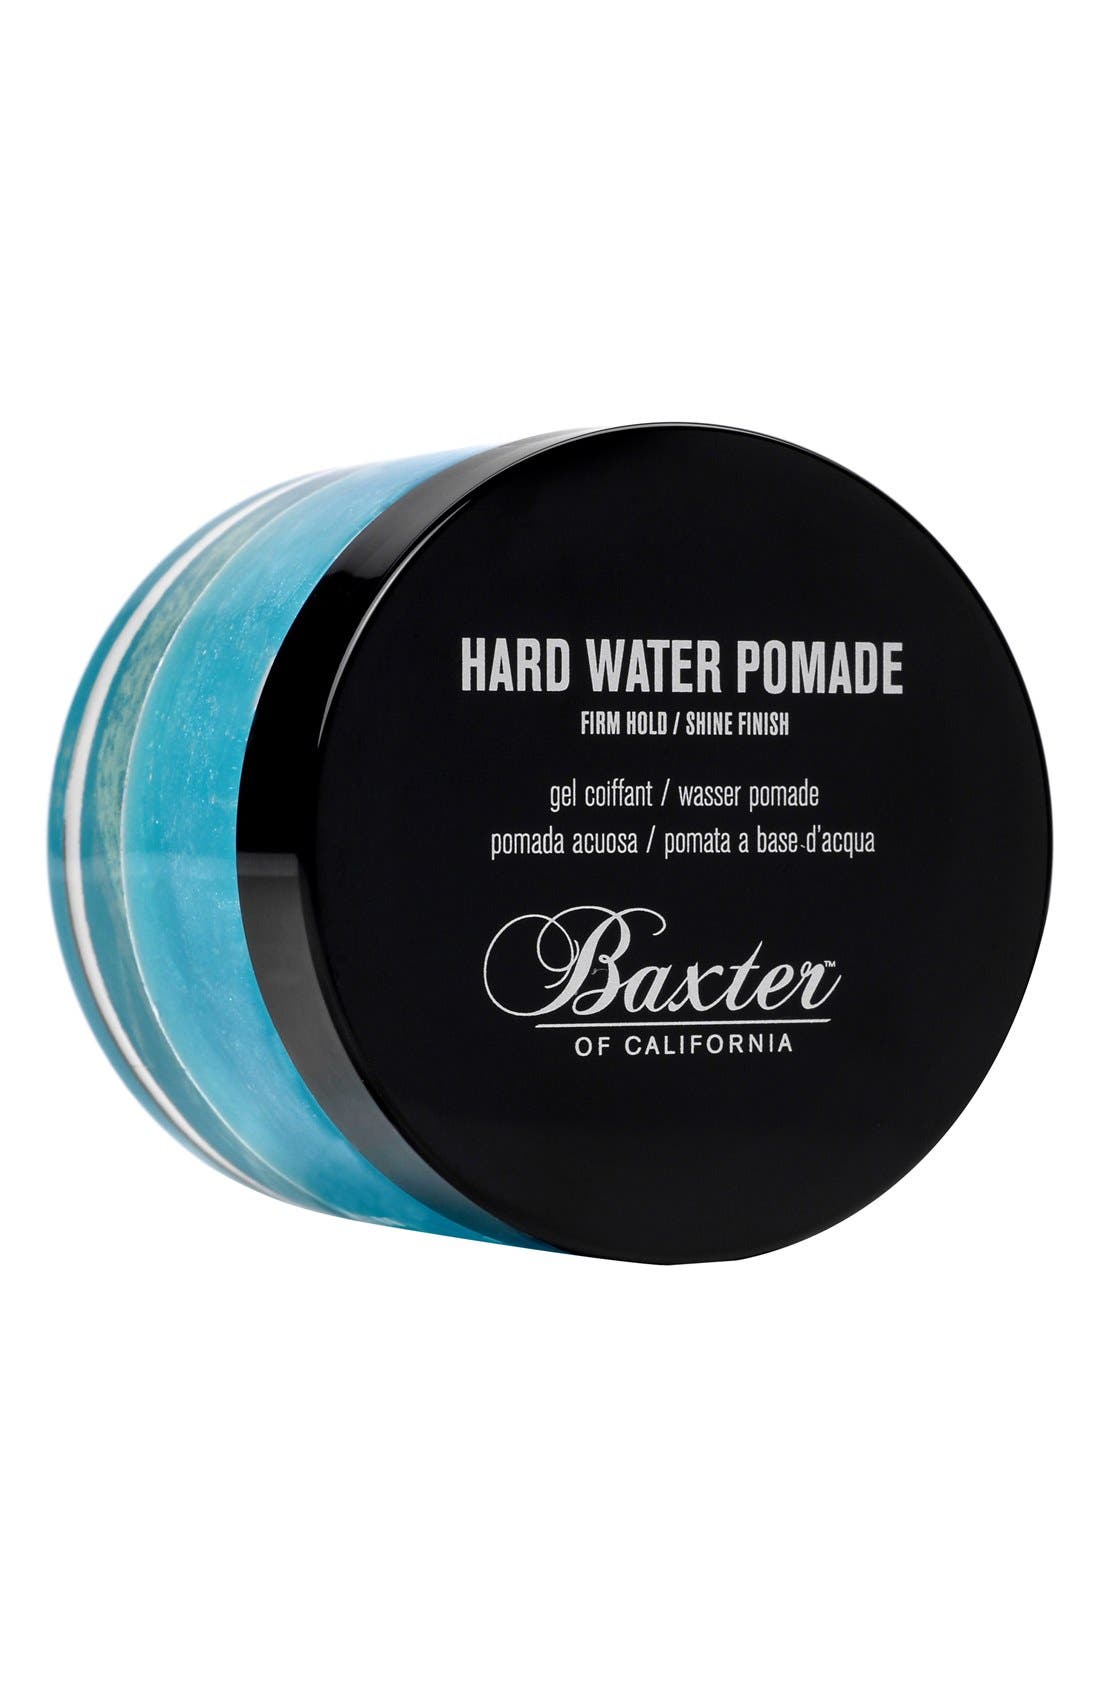 BAXTER OF CALIFORNIA HARD WATER POMADE IN NO COLOR,838364004033